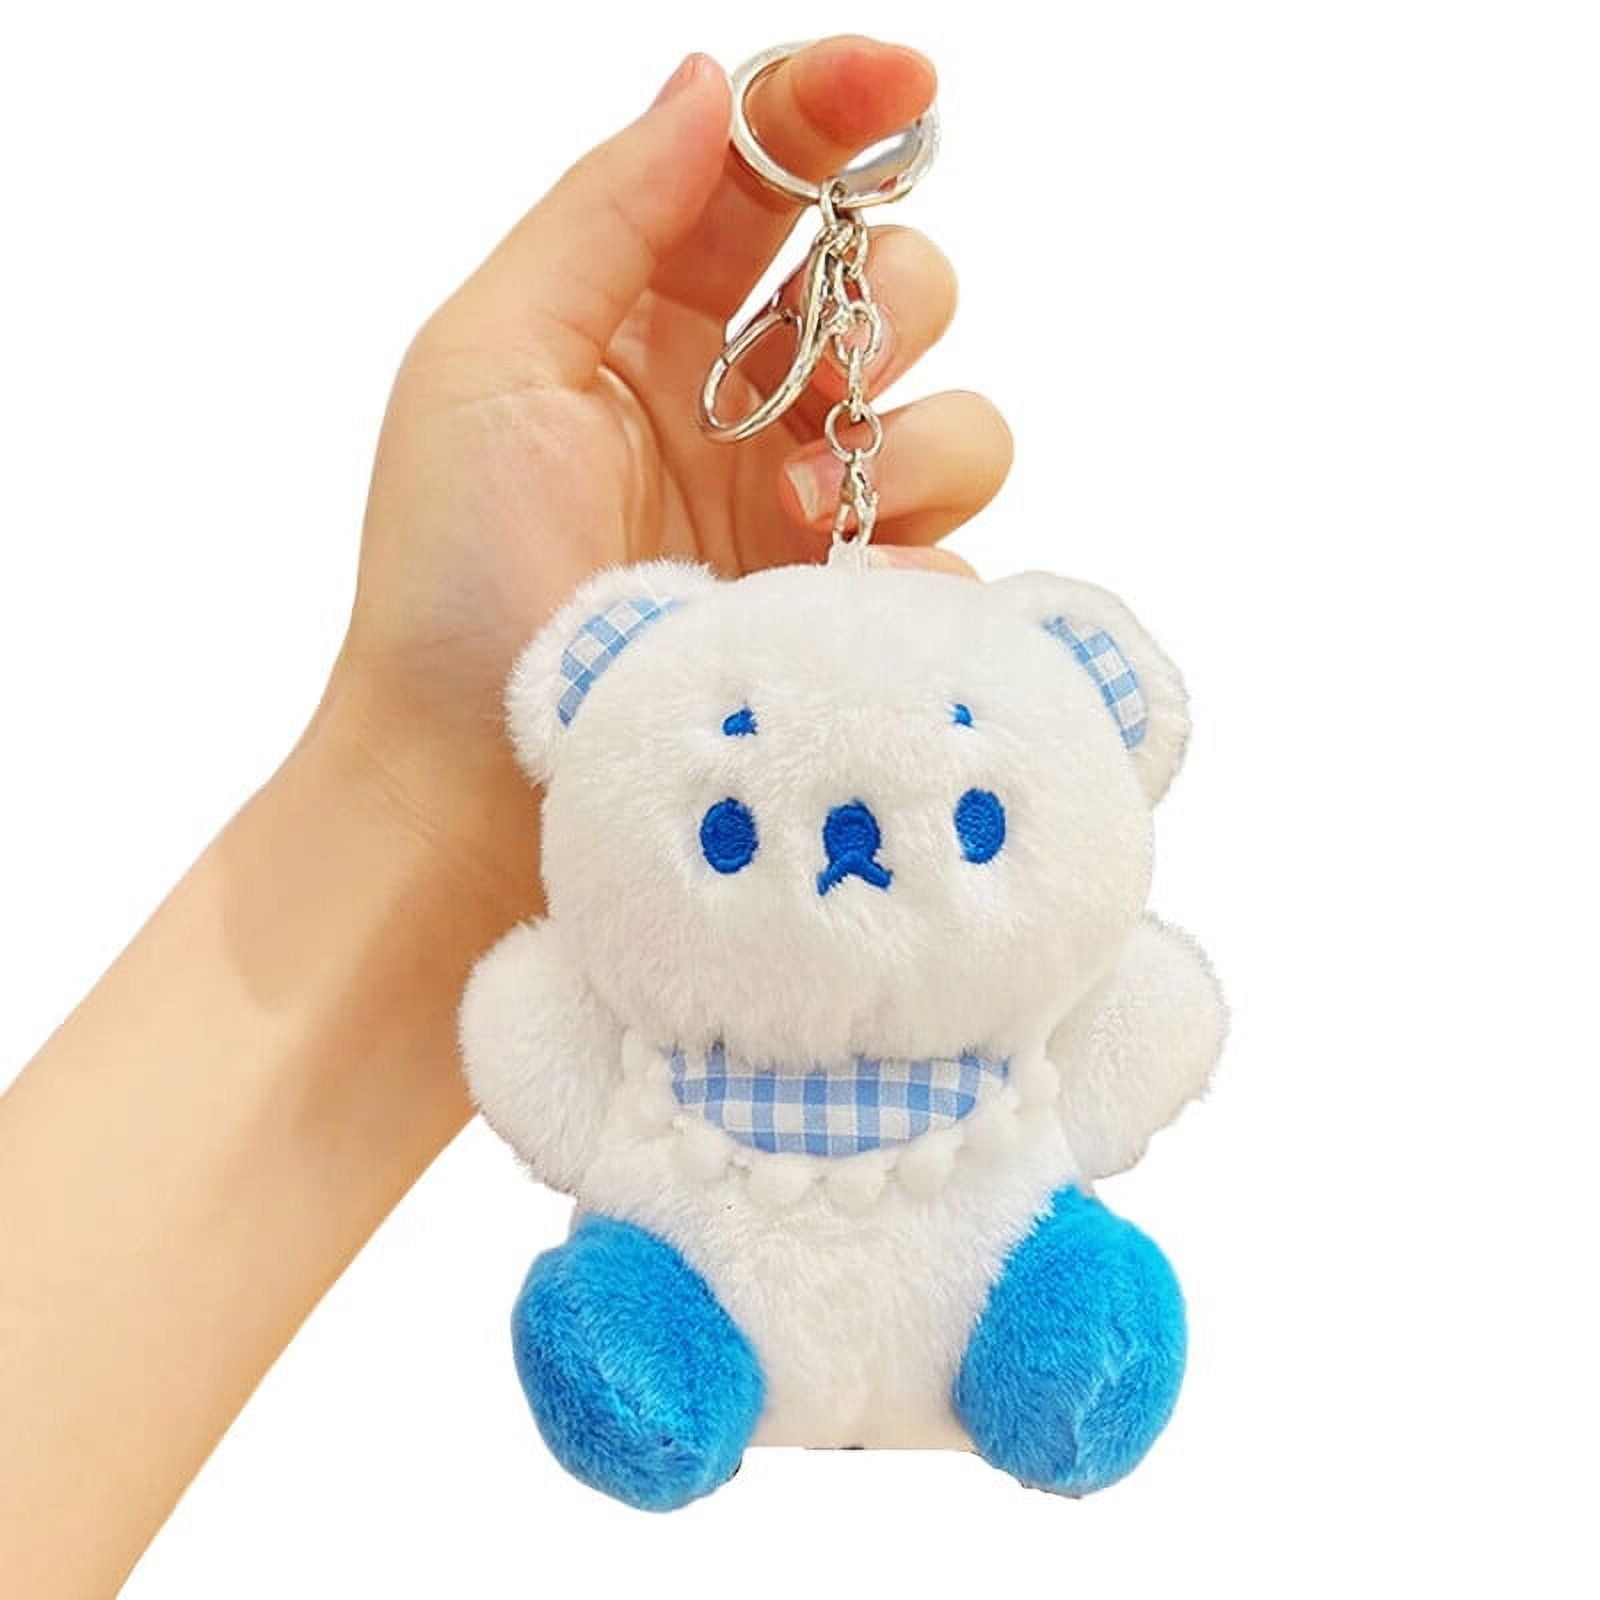 Stainless Steel Lovely Activities Bear Metal Key Chain Teddy Bear Key Ring  ~Cute Gift